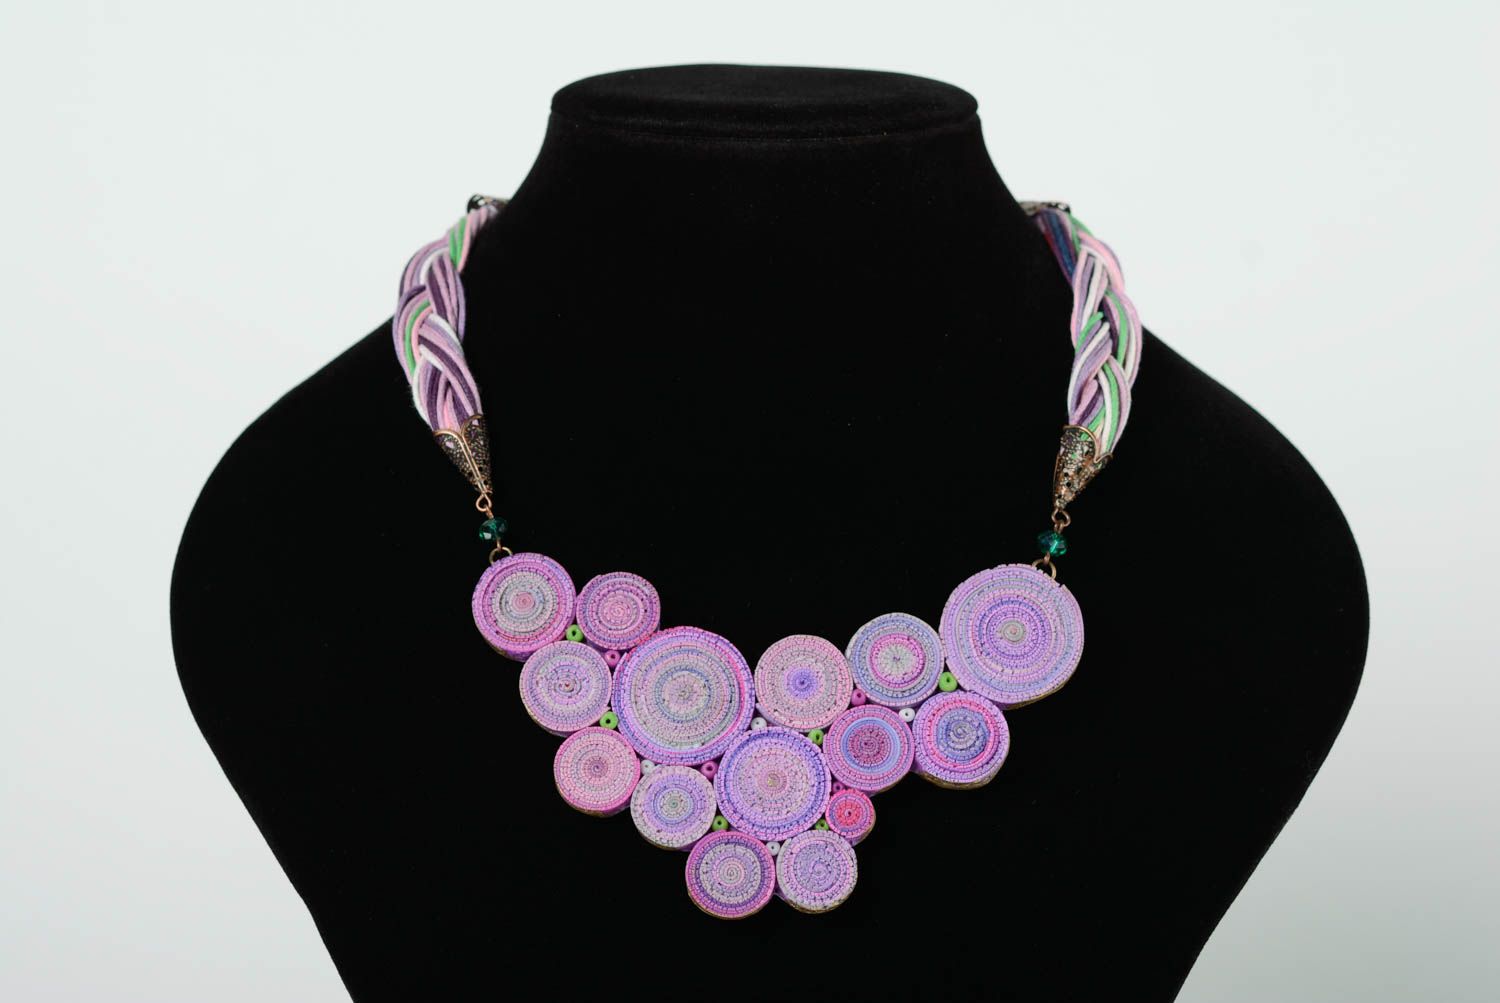 Handmade purple polymer clay necklace with cords Torn Edge photo 5